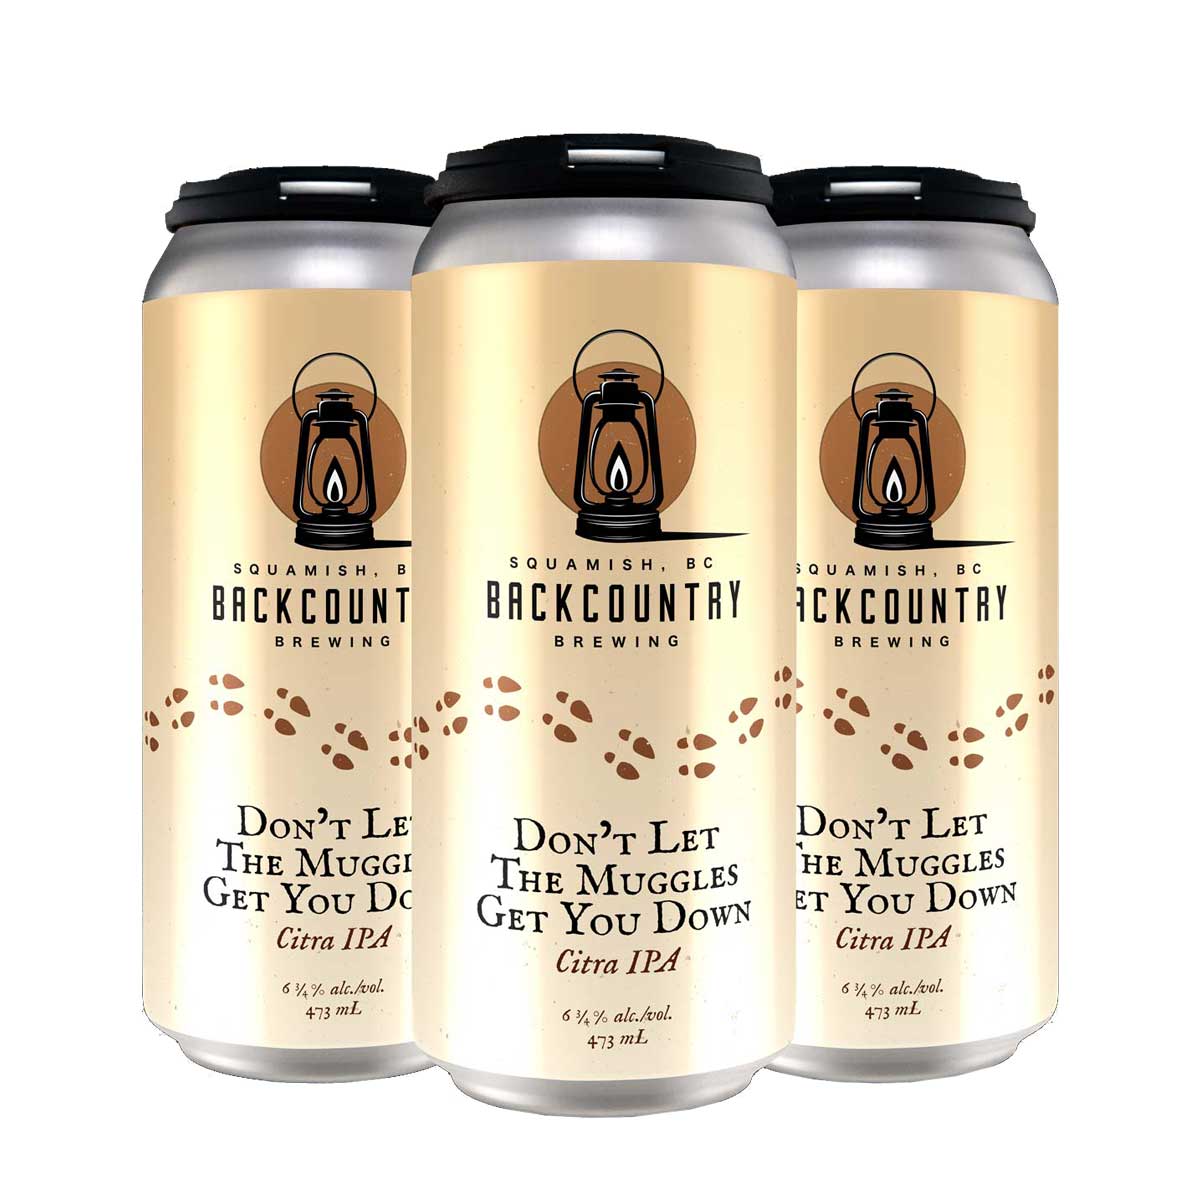 TAG Liquor Stores BC - Backcountry Brewing "Don't let the Muggles get you down" Citra IPA 4 Pack Cans